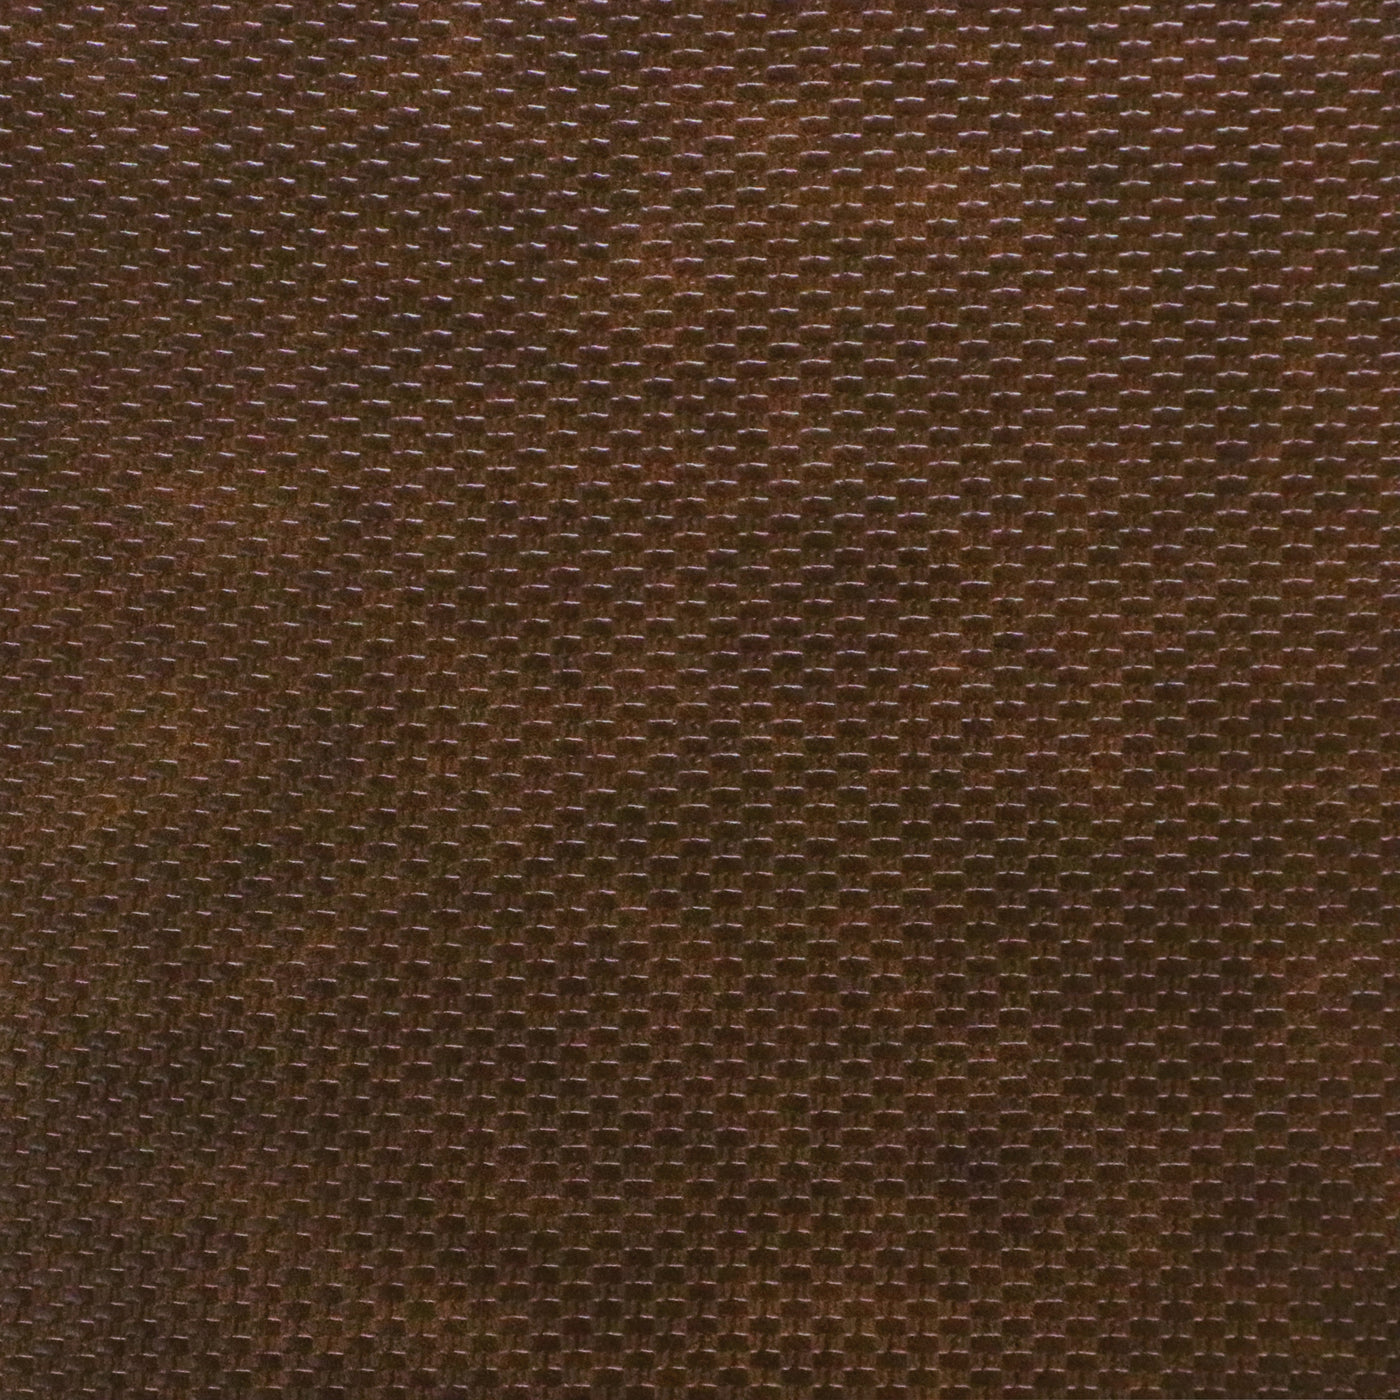 Brown Weave Faux Leather